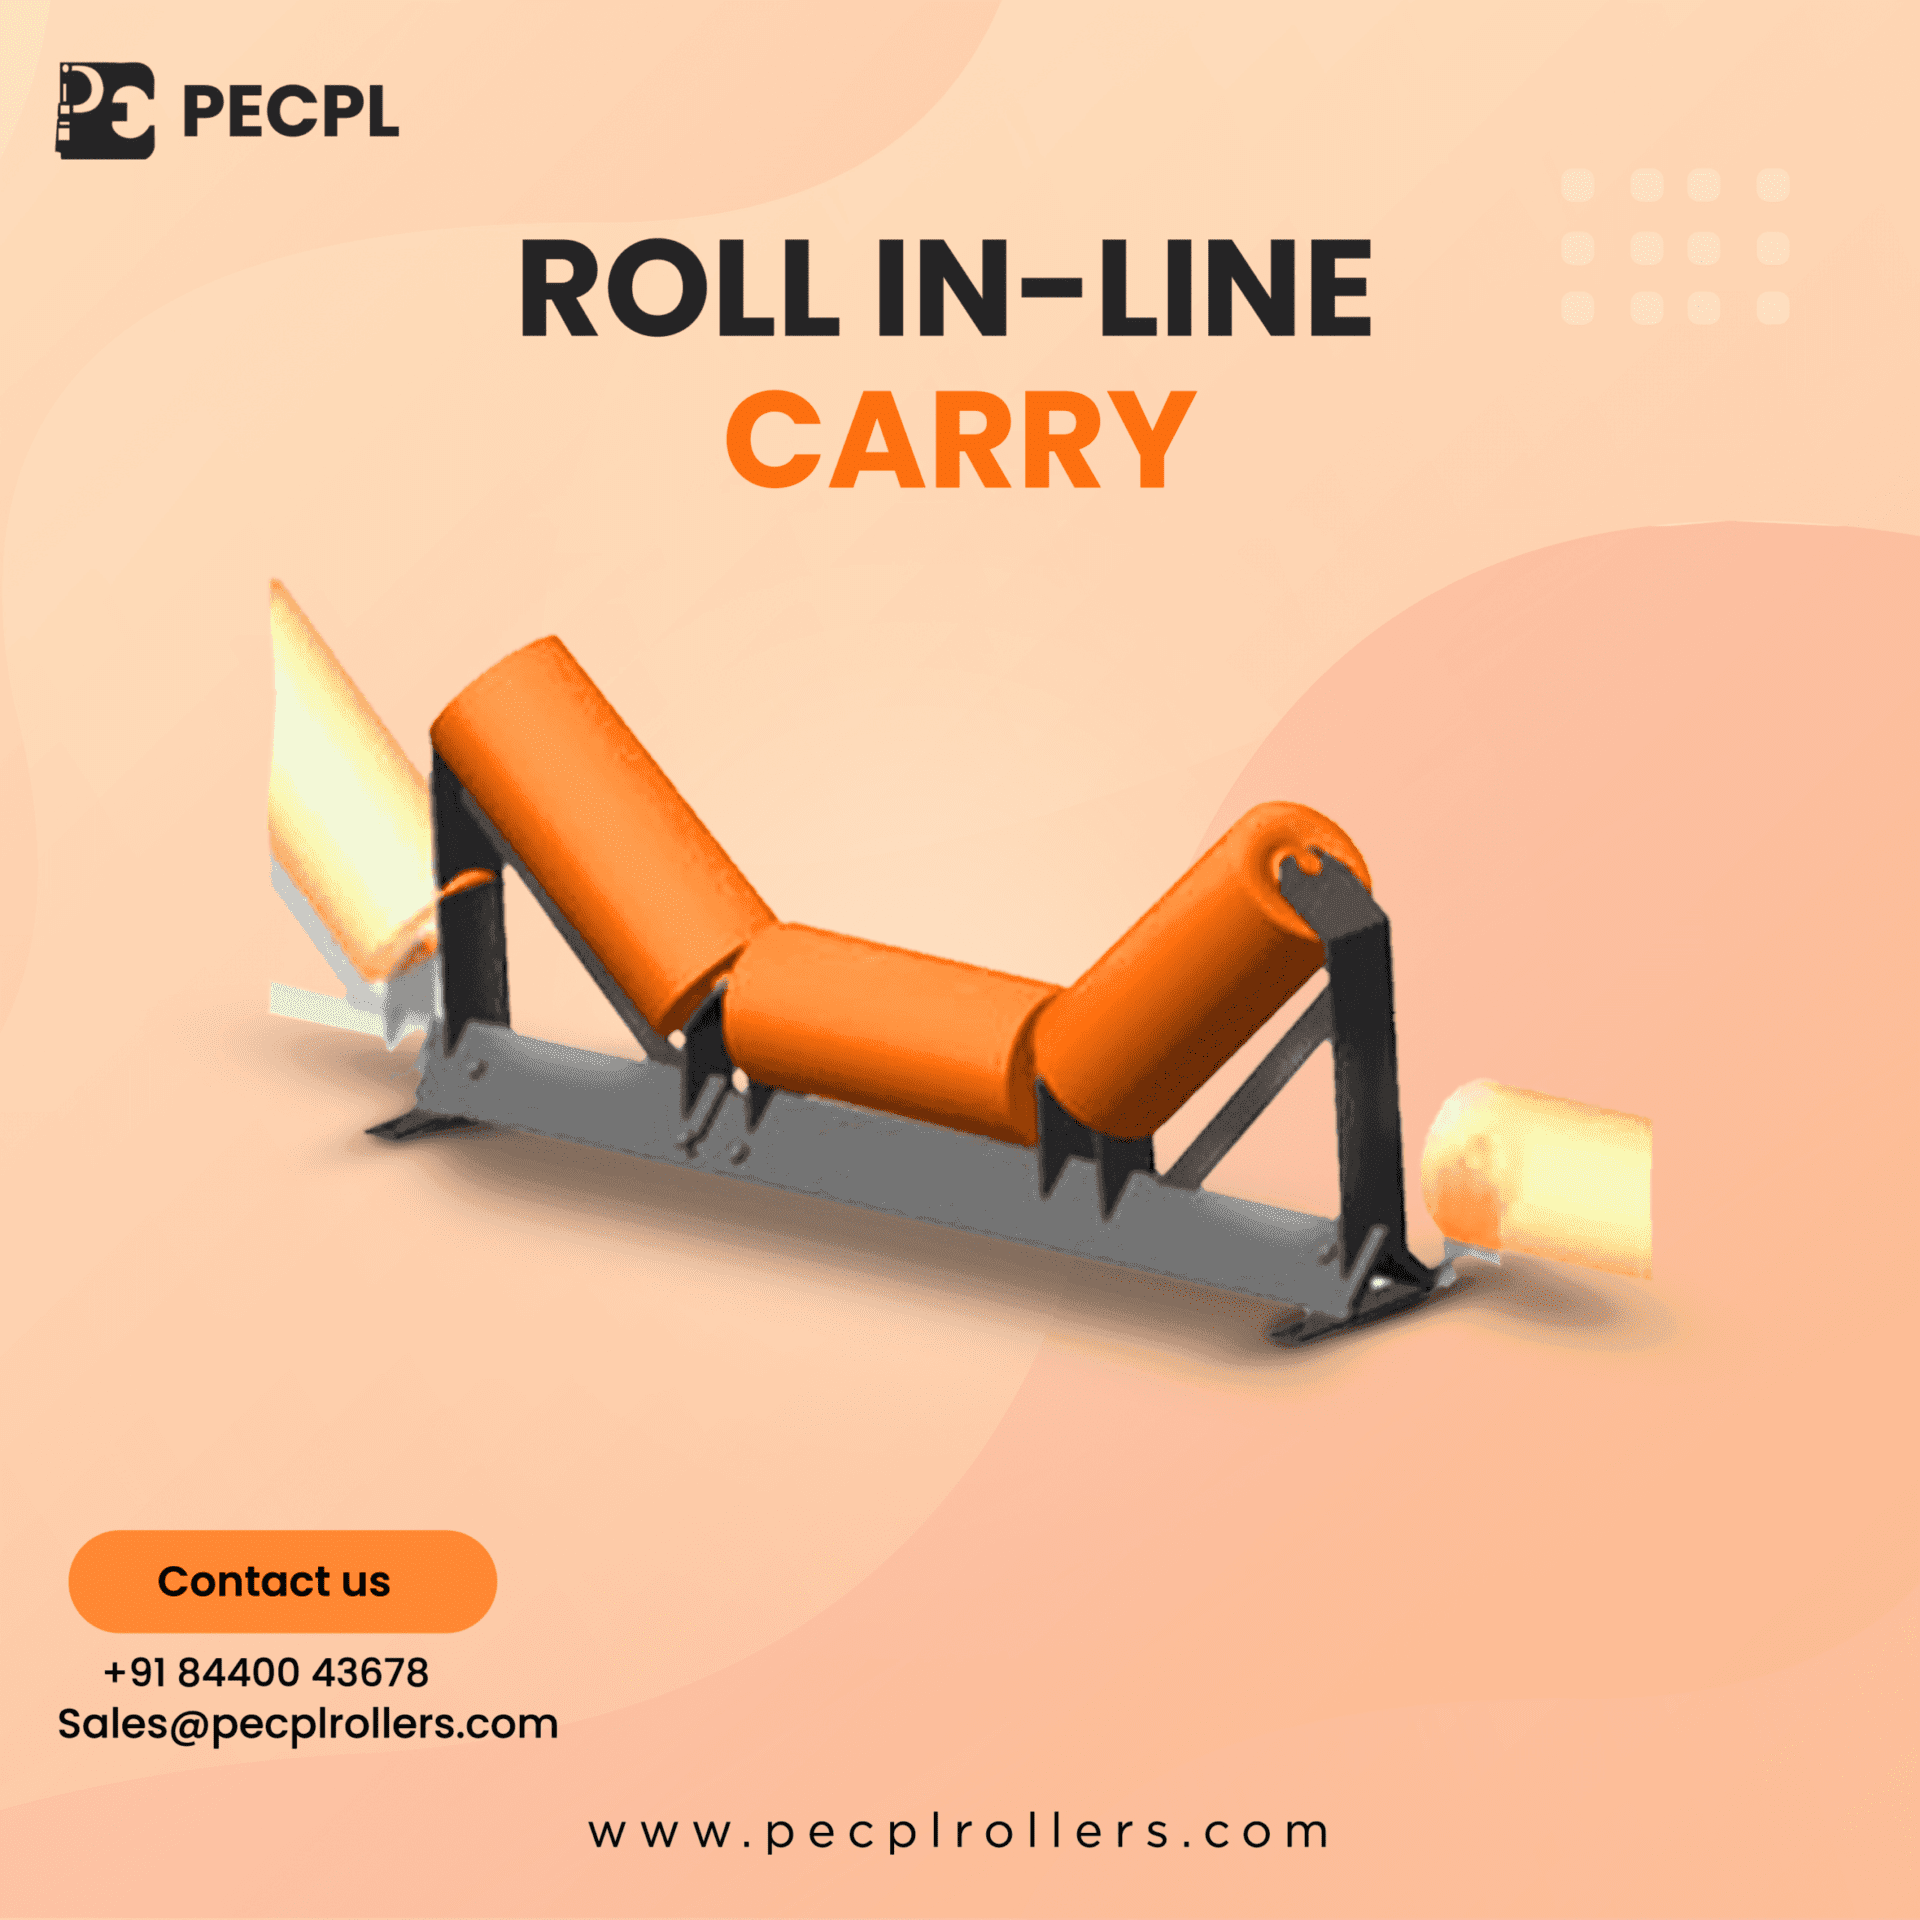 ROLL IN-LINE CARRY